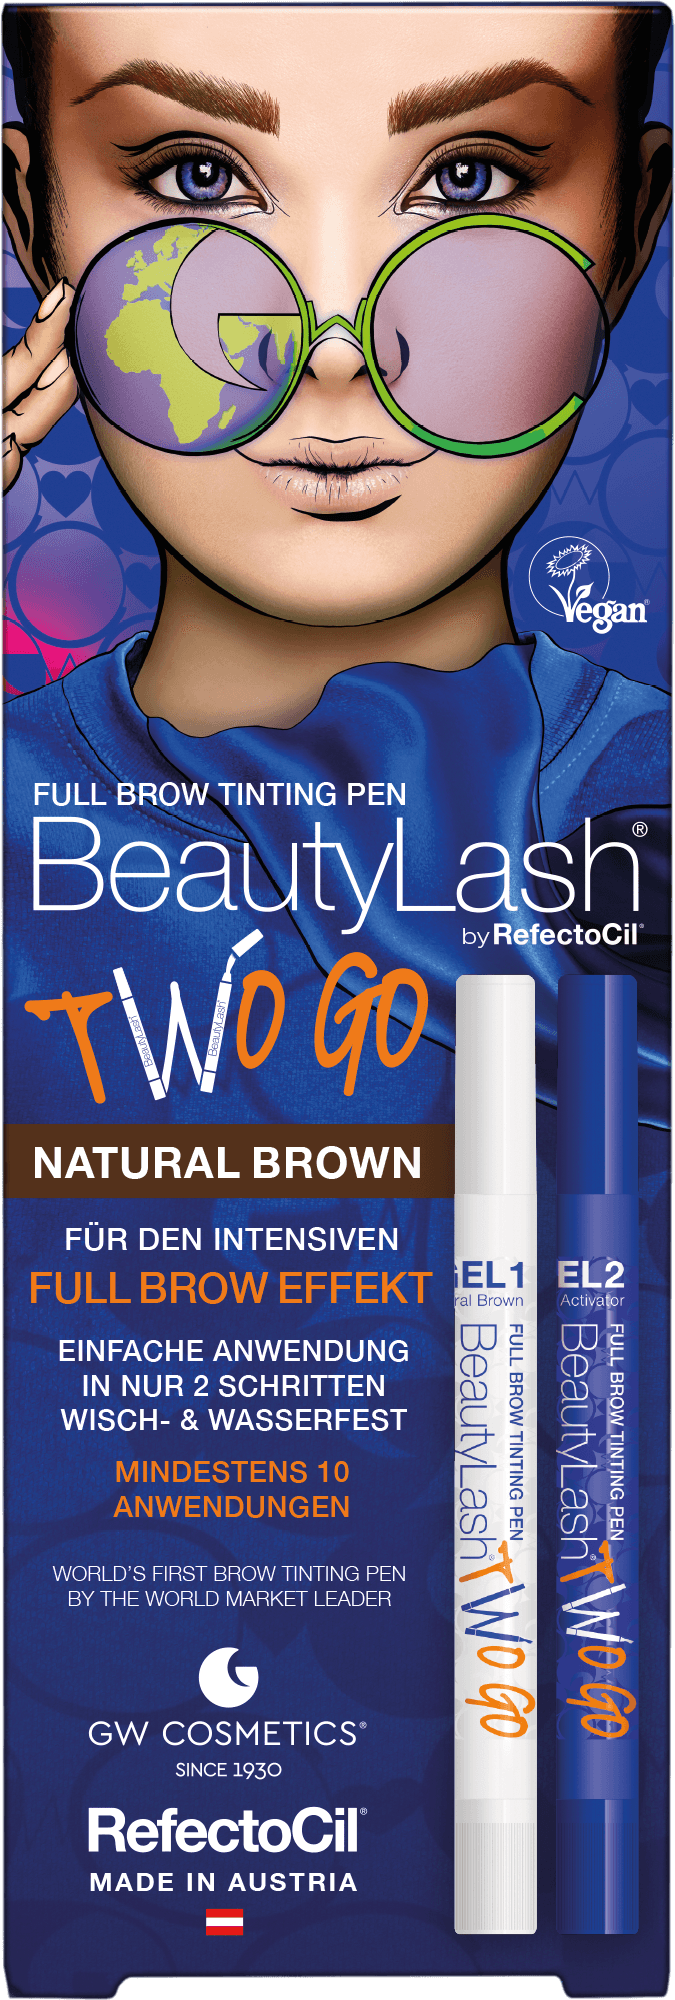 Full Brow Tinting Pen Two Go - Natural Brown